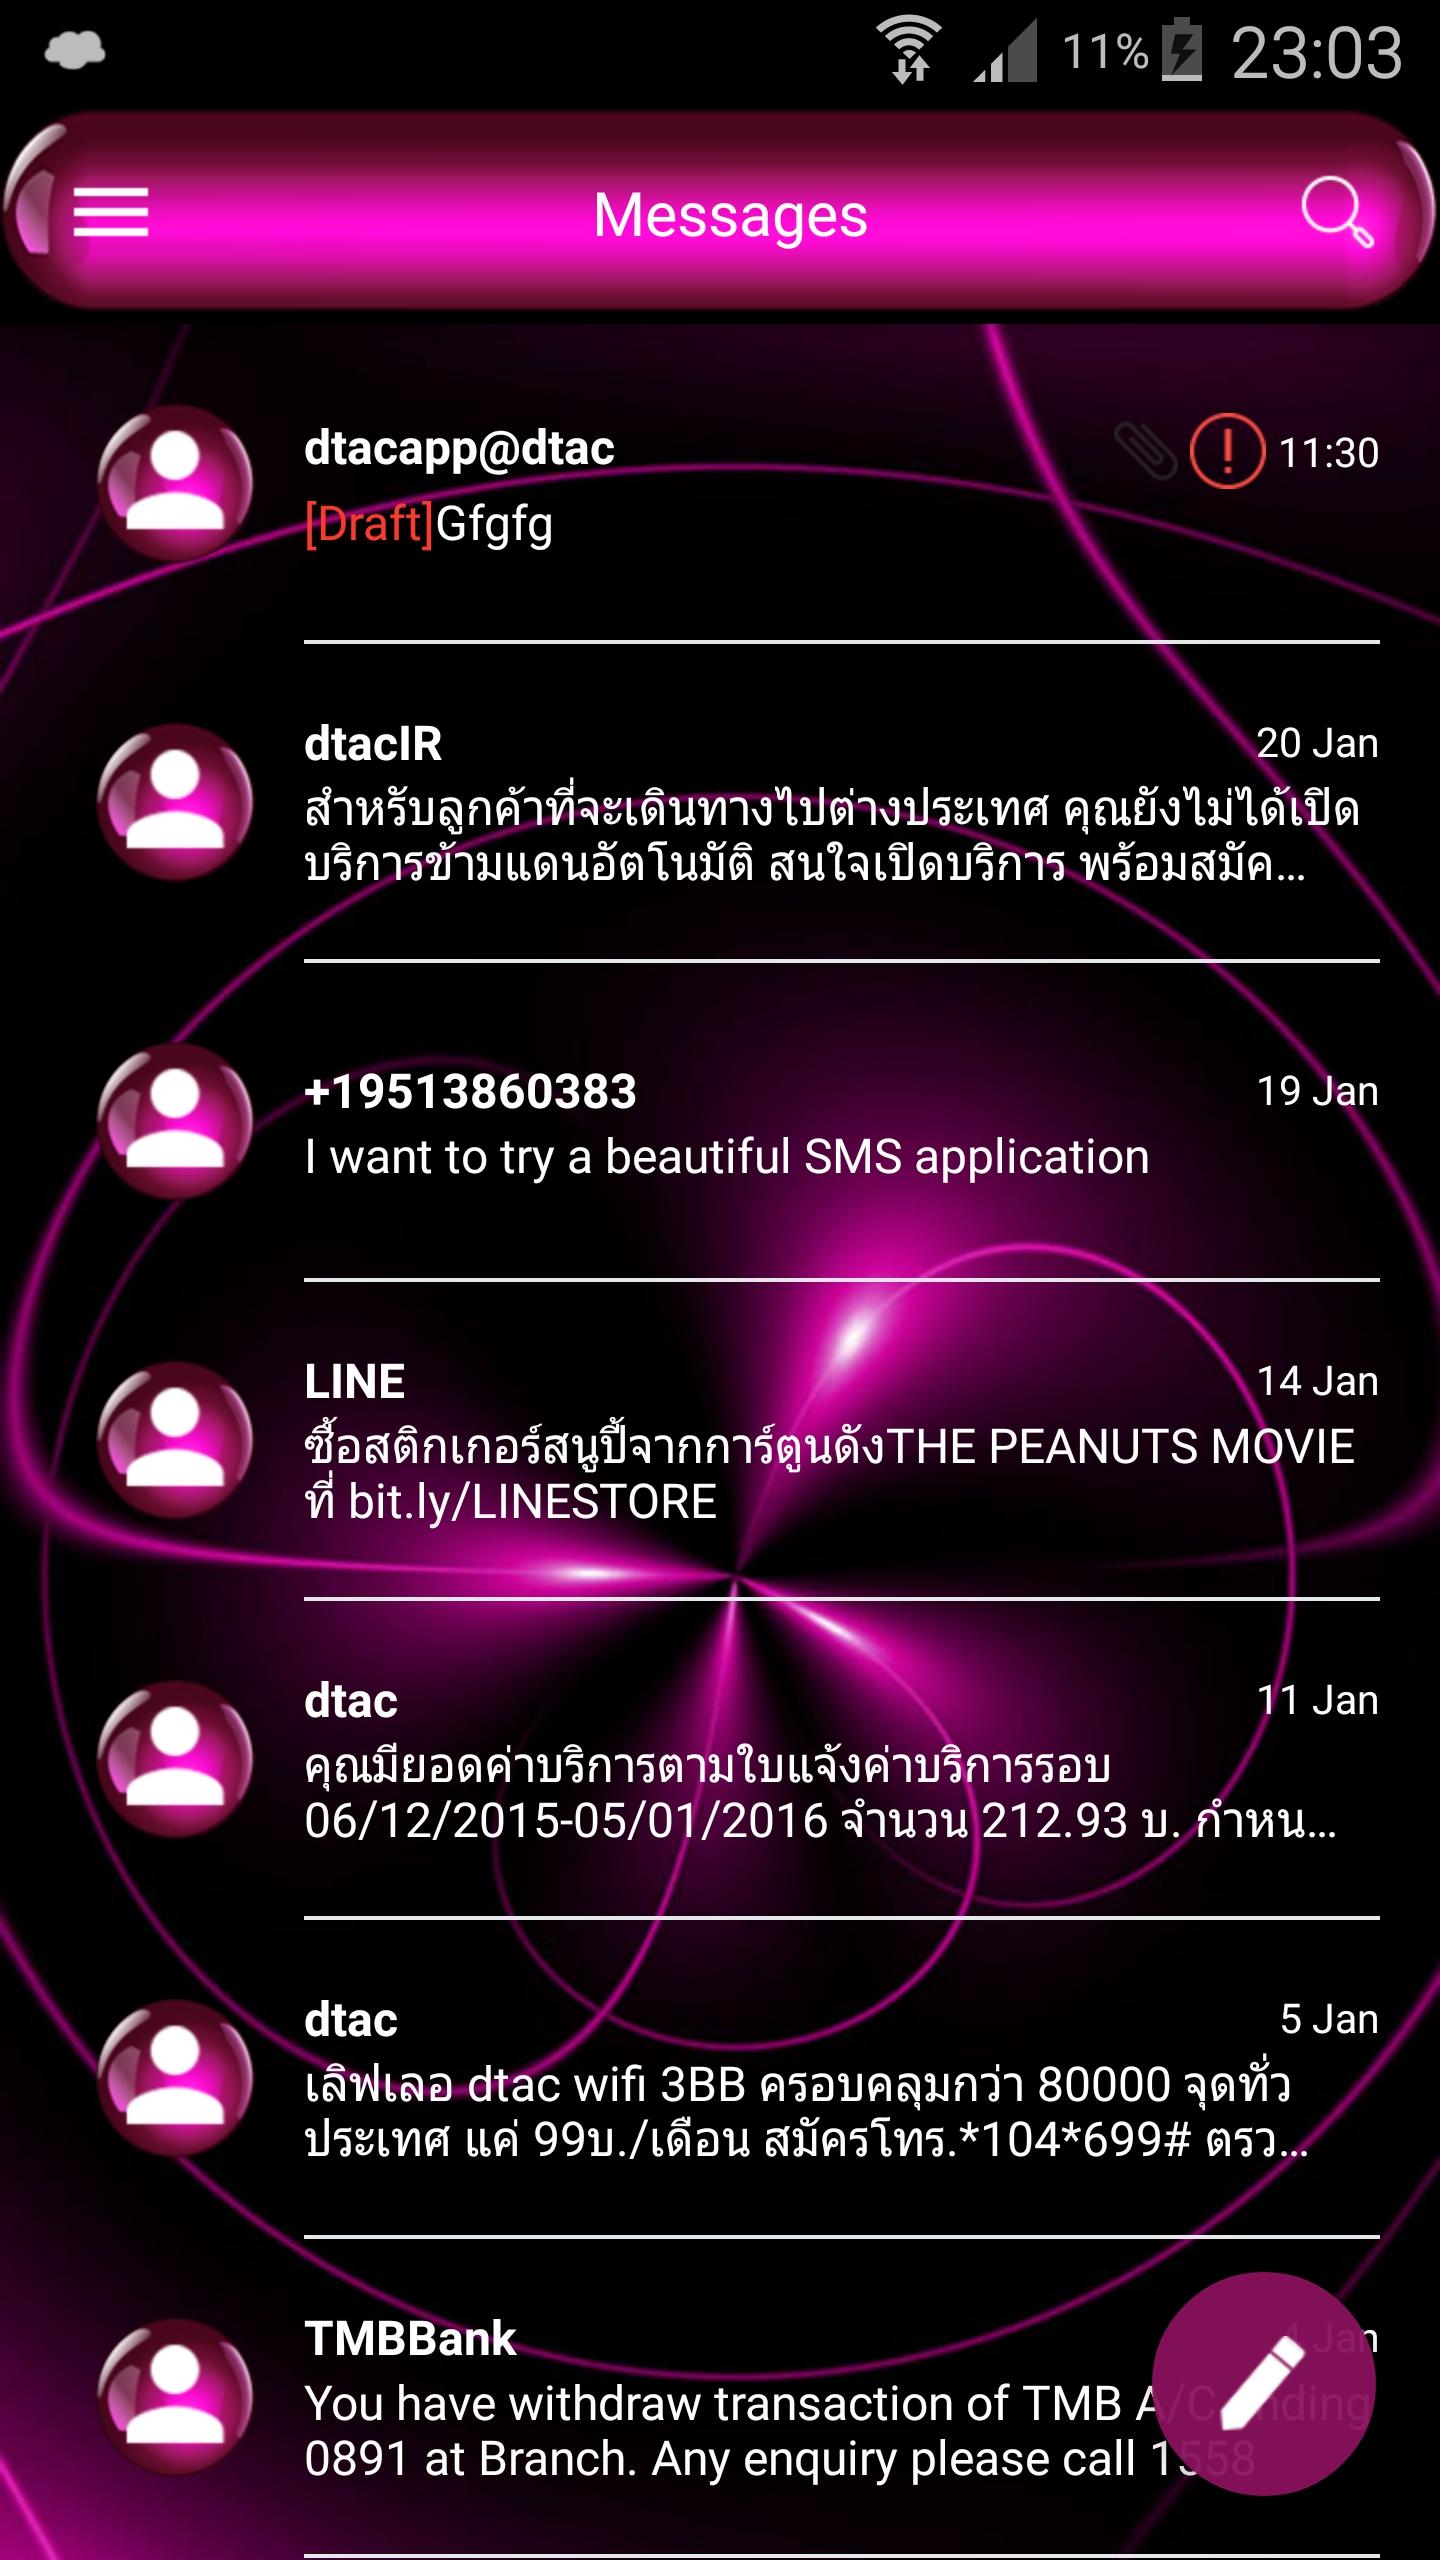 Android application SMS Messages Spheres Pink Theme screenshort